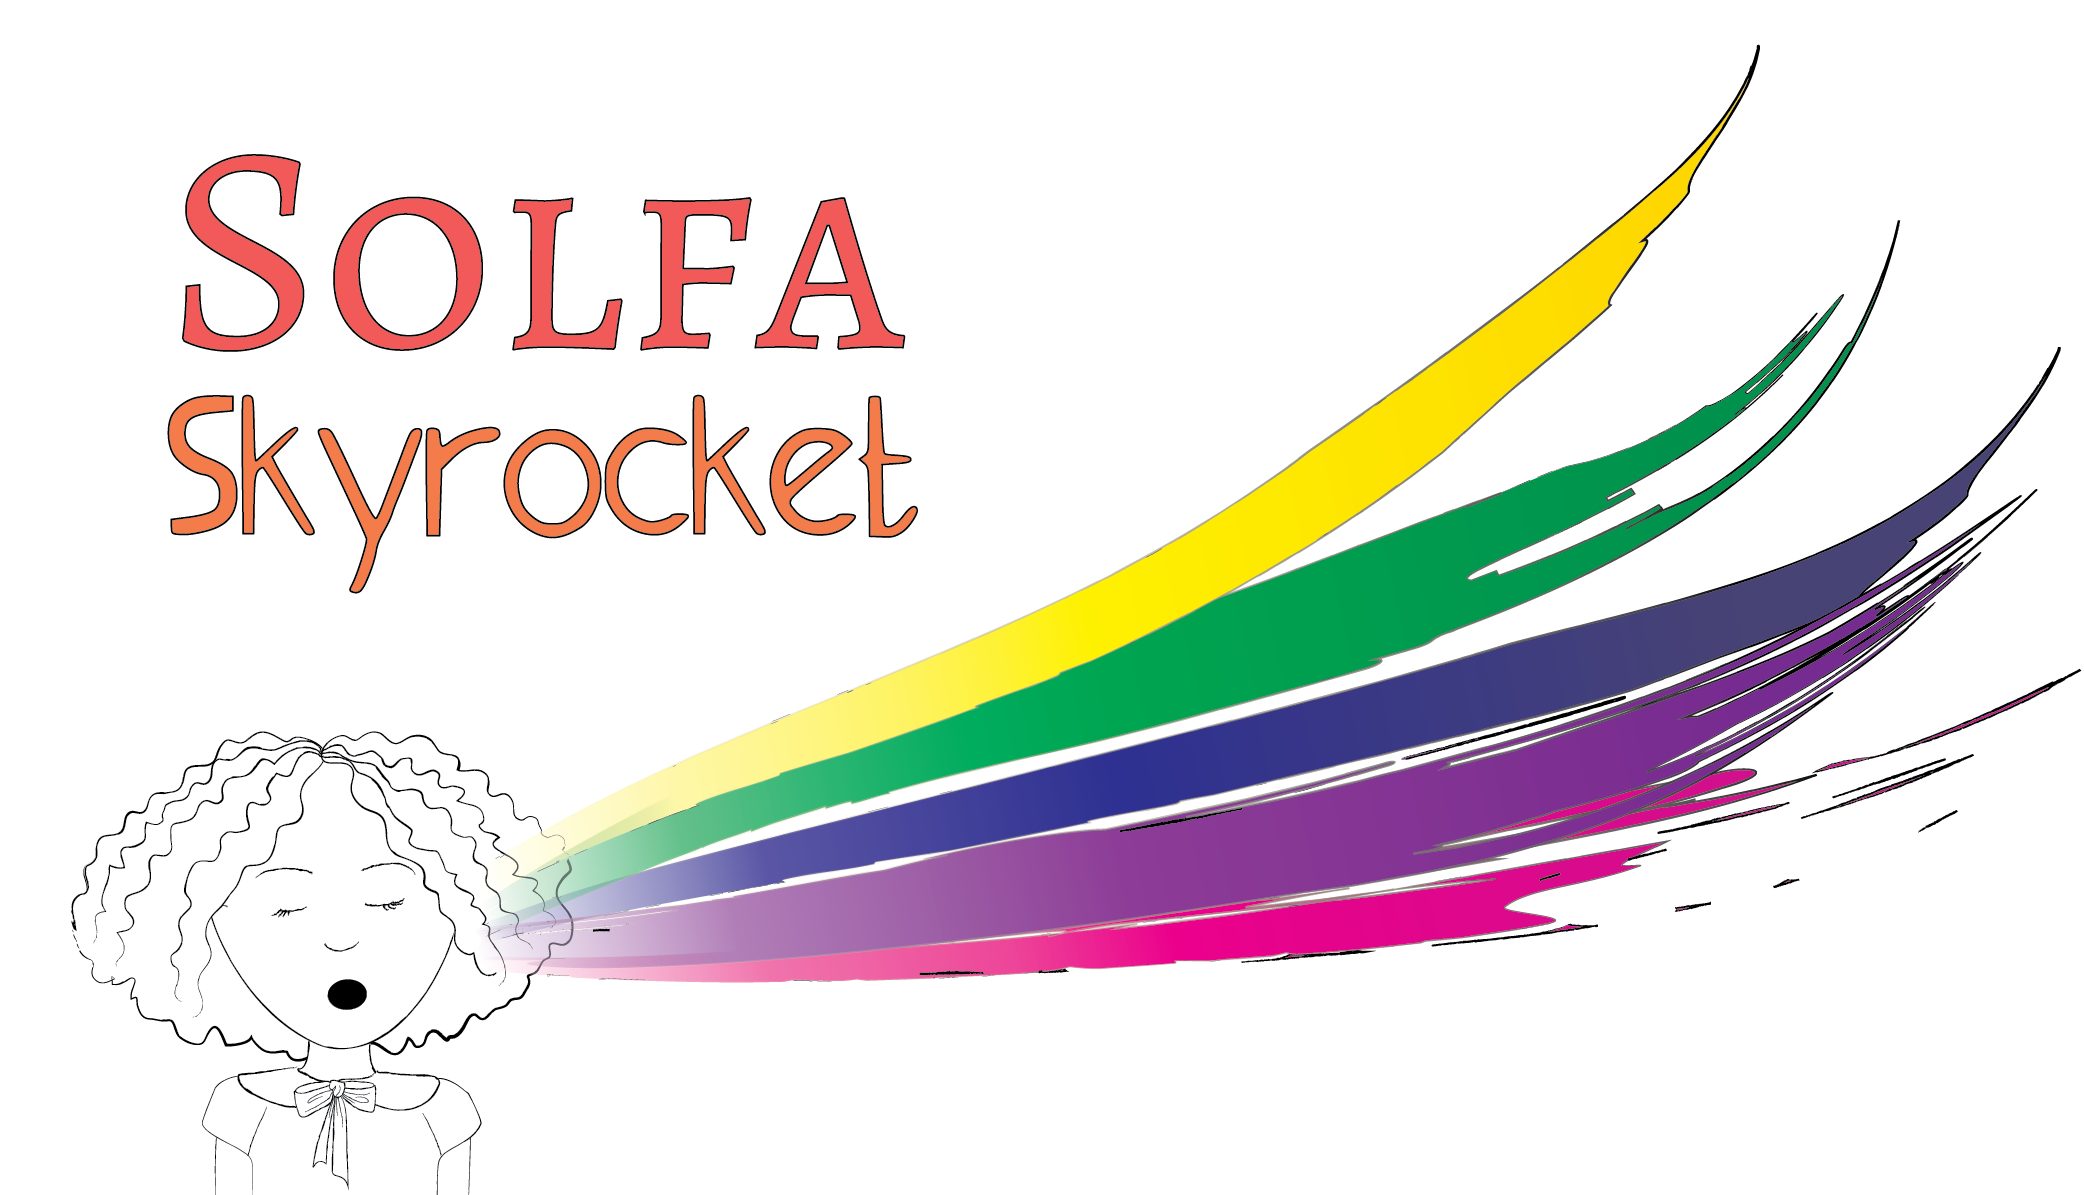 Solfa skyrocket course from Vibrant Music Teaching